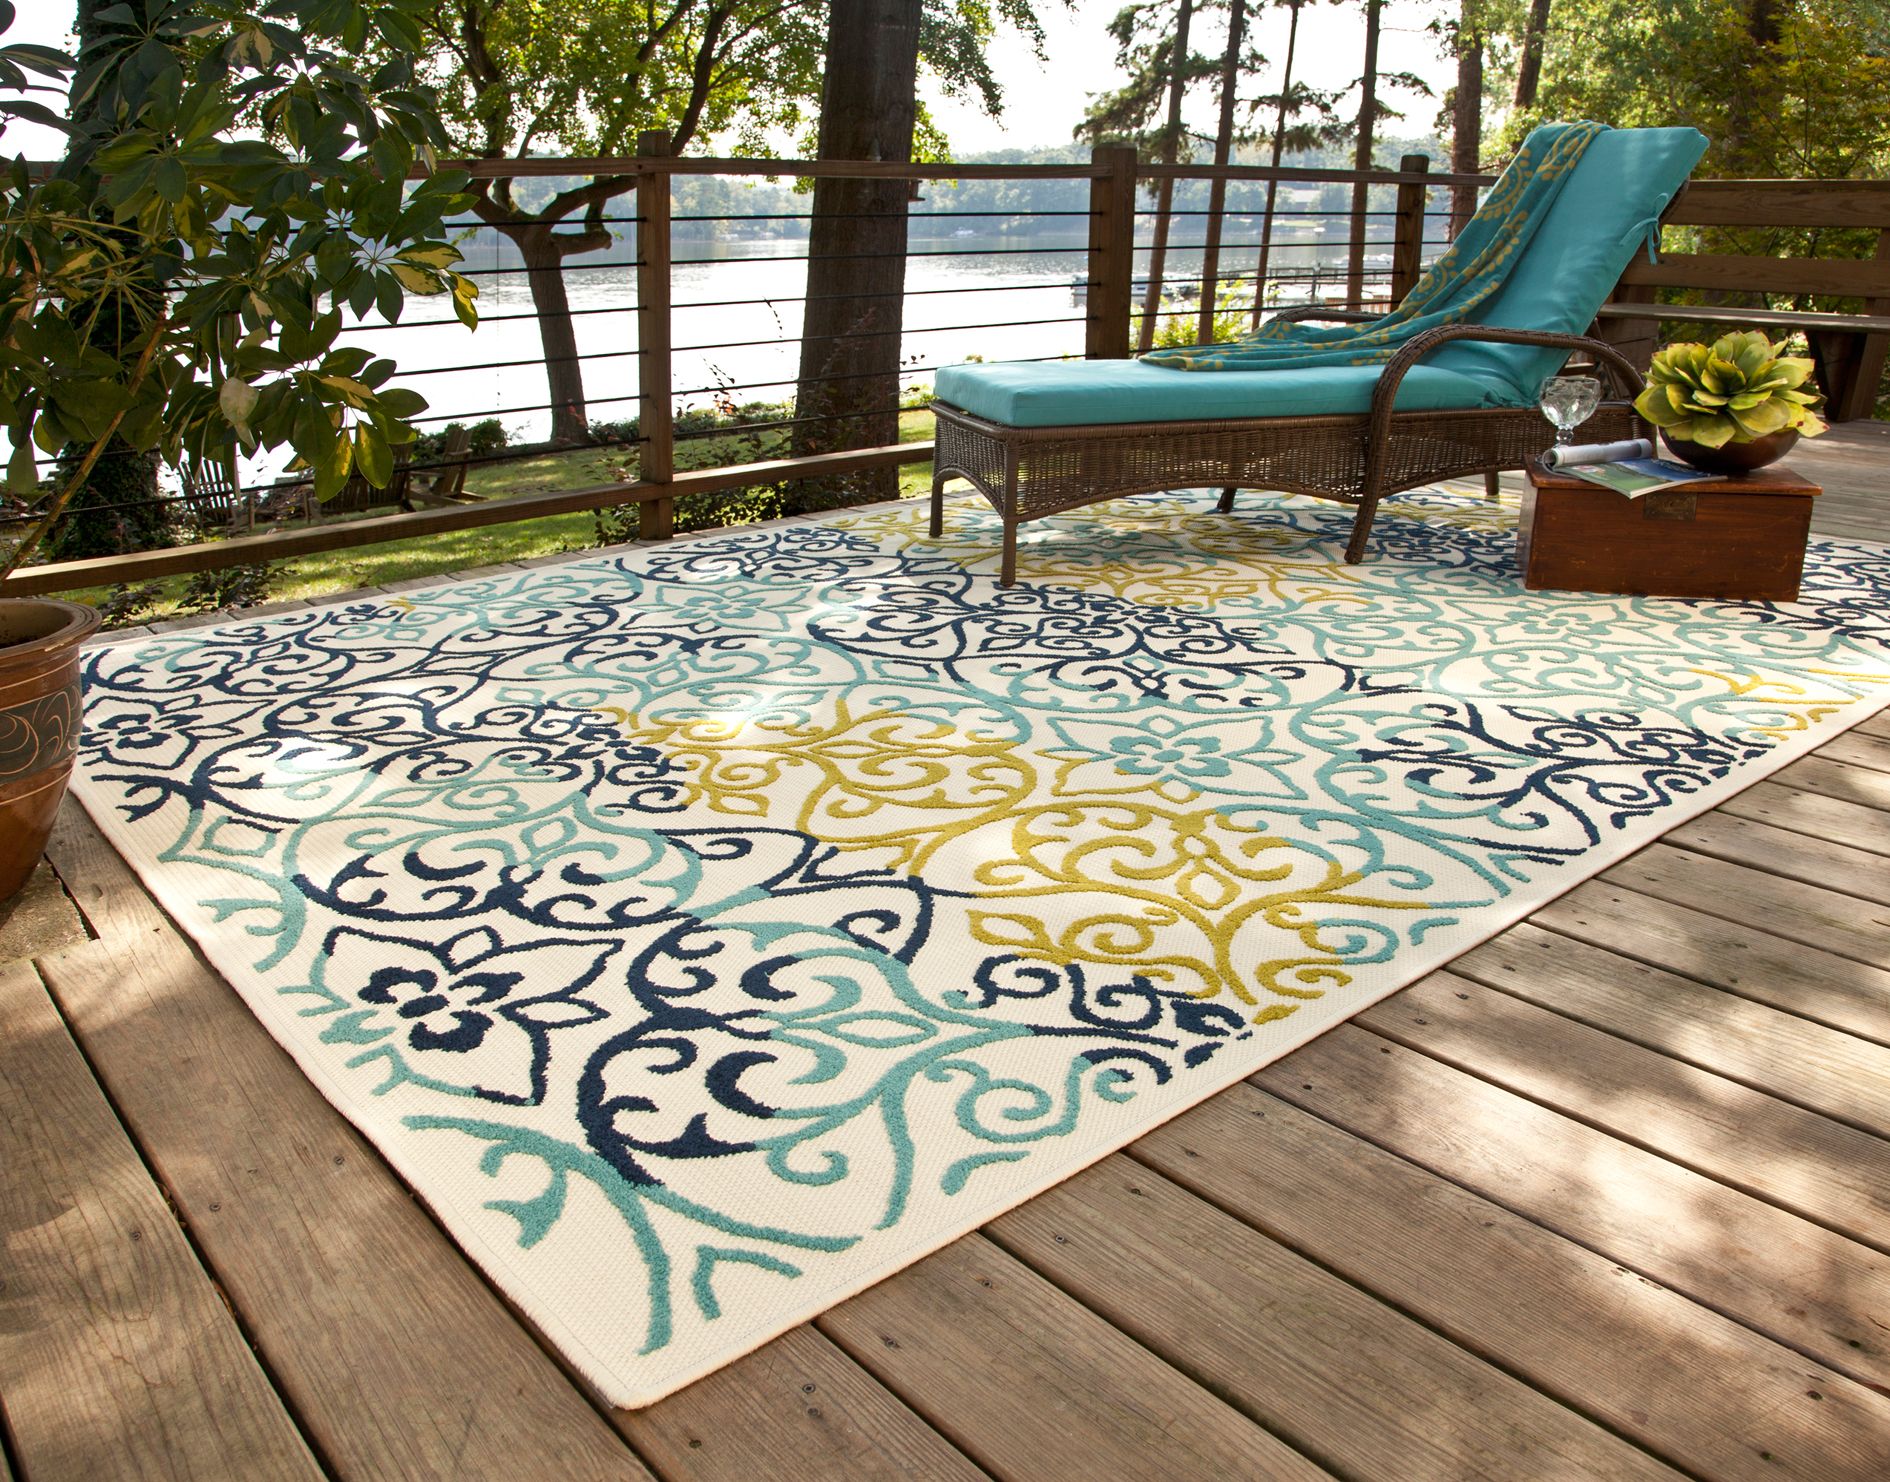 Which Rugs Collections Are Best for Outdoor Spaces in Home?